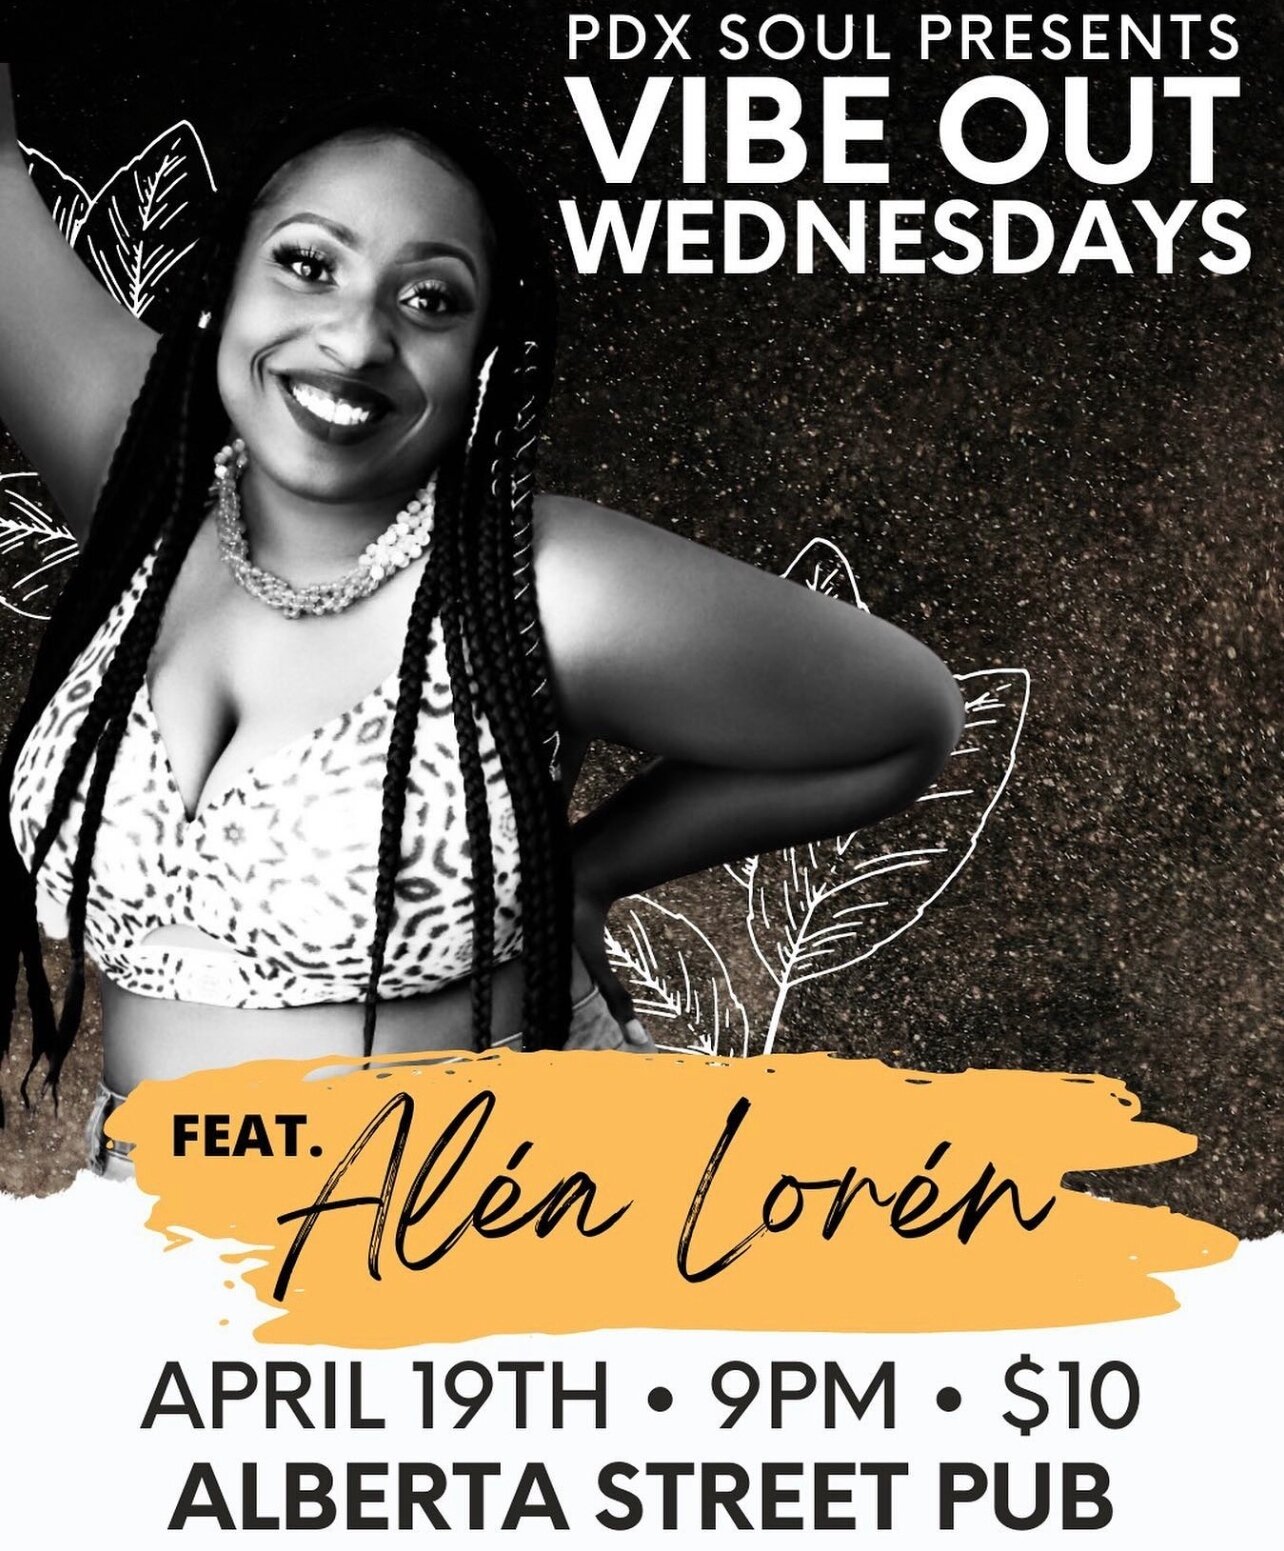 Wednesday! 4/19
@tyronehendrix

&ldquo;Tonight At 9pm Don't Miss Vibe Out
Wednesday At @albertastreetpub Featuring @alea_loren
Cover is $10&rdquo;

#pdx #blackexcellence #portland #blacklivesmatter #pdxblackexcellence